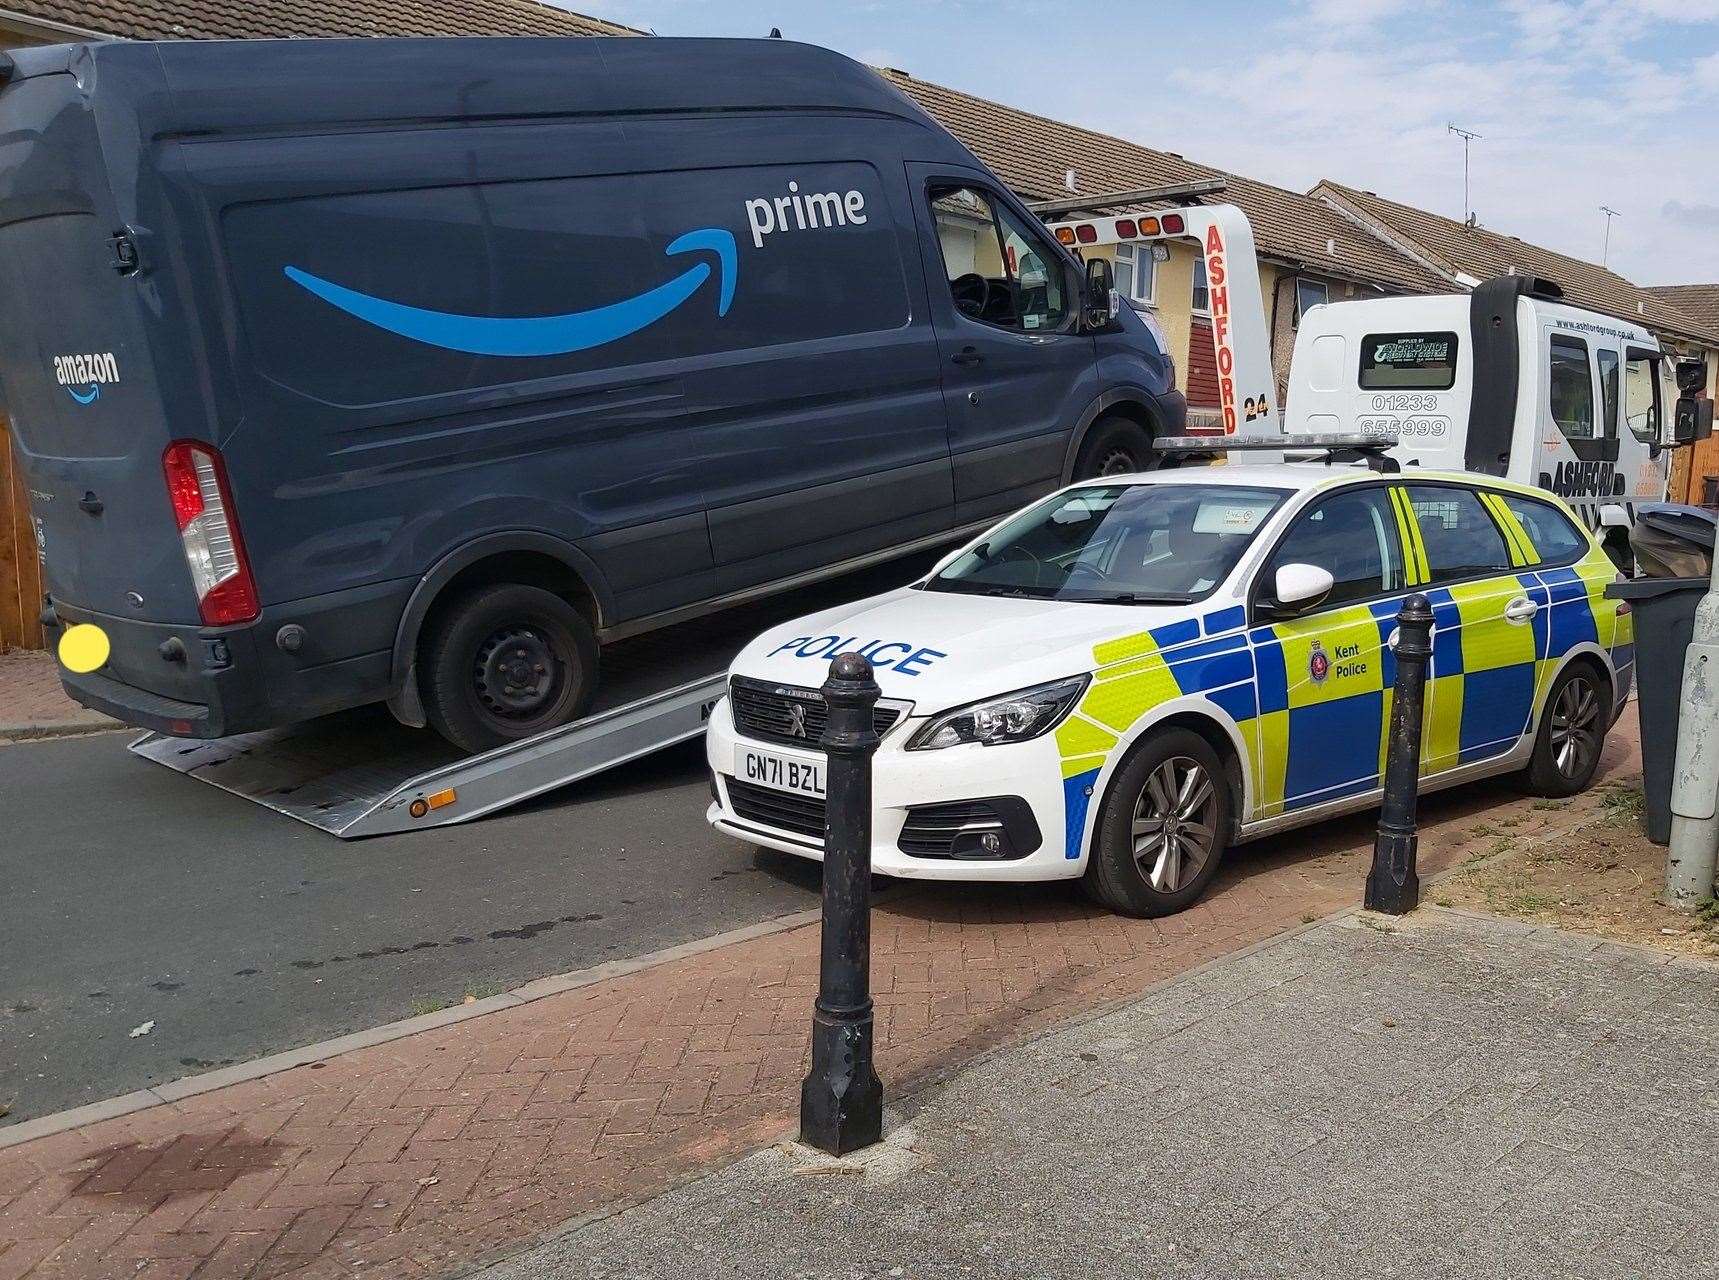 The Amazon van was recovered in Stanhope after being stolen from Kingsnorth Road. Picture: Kent Police